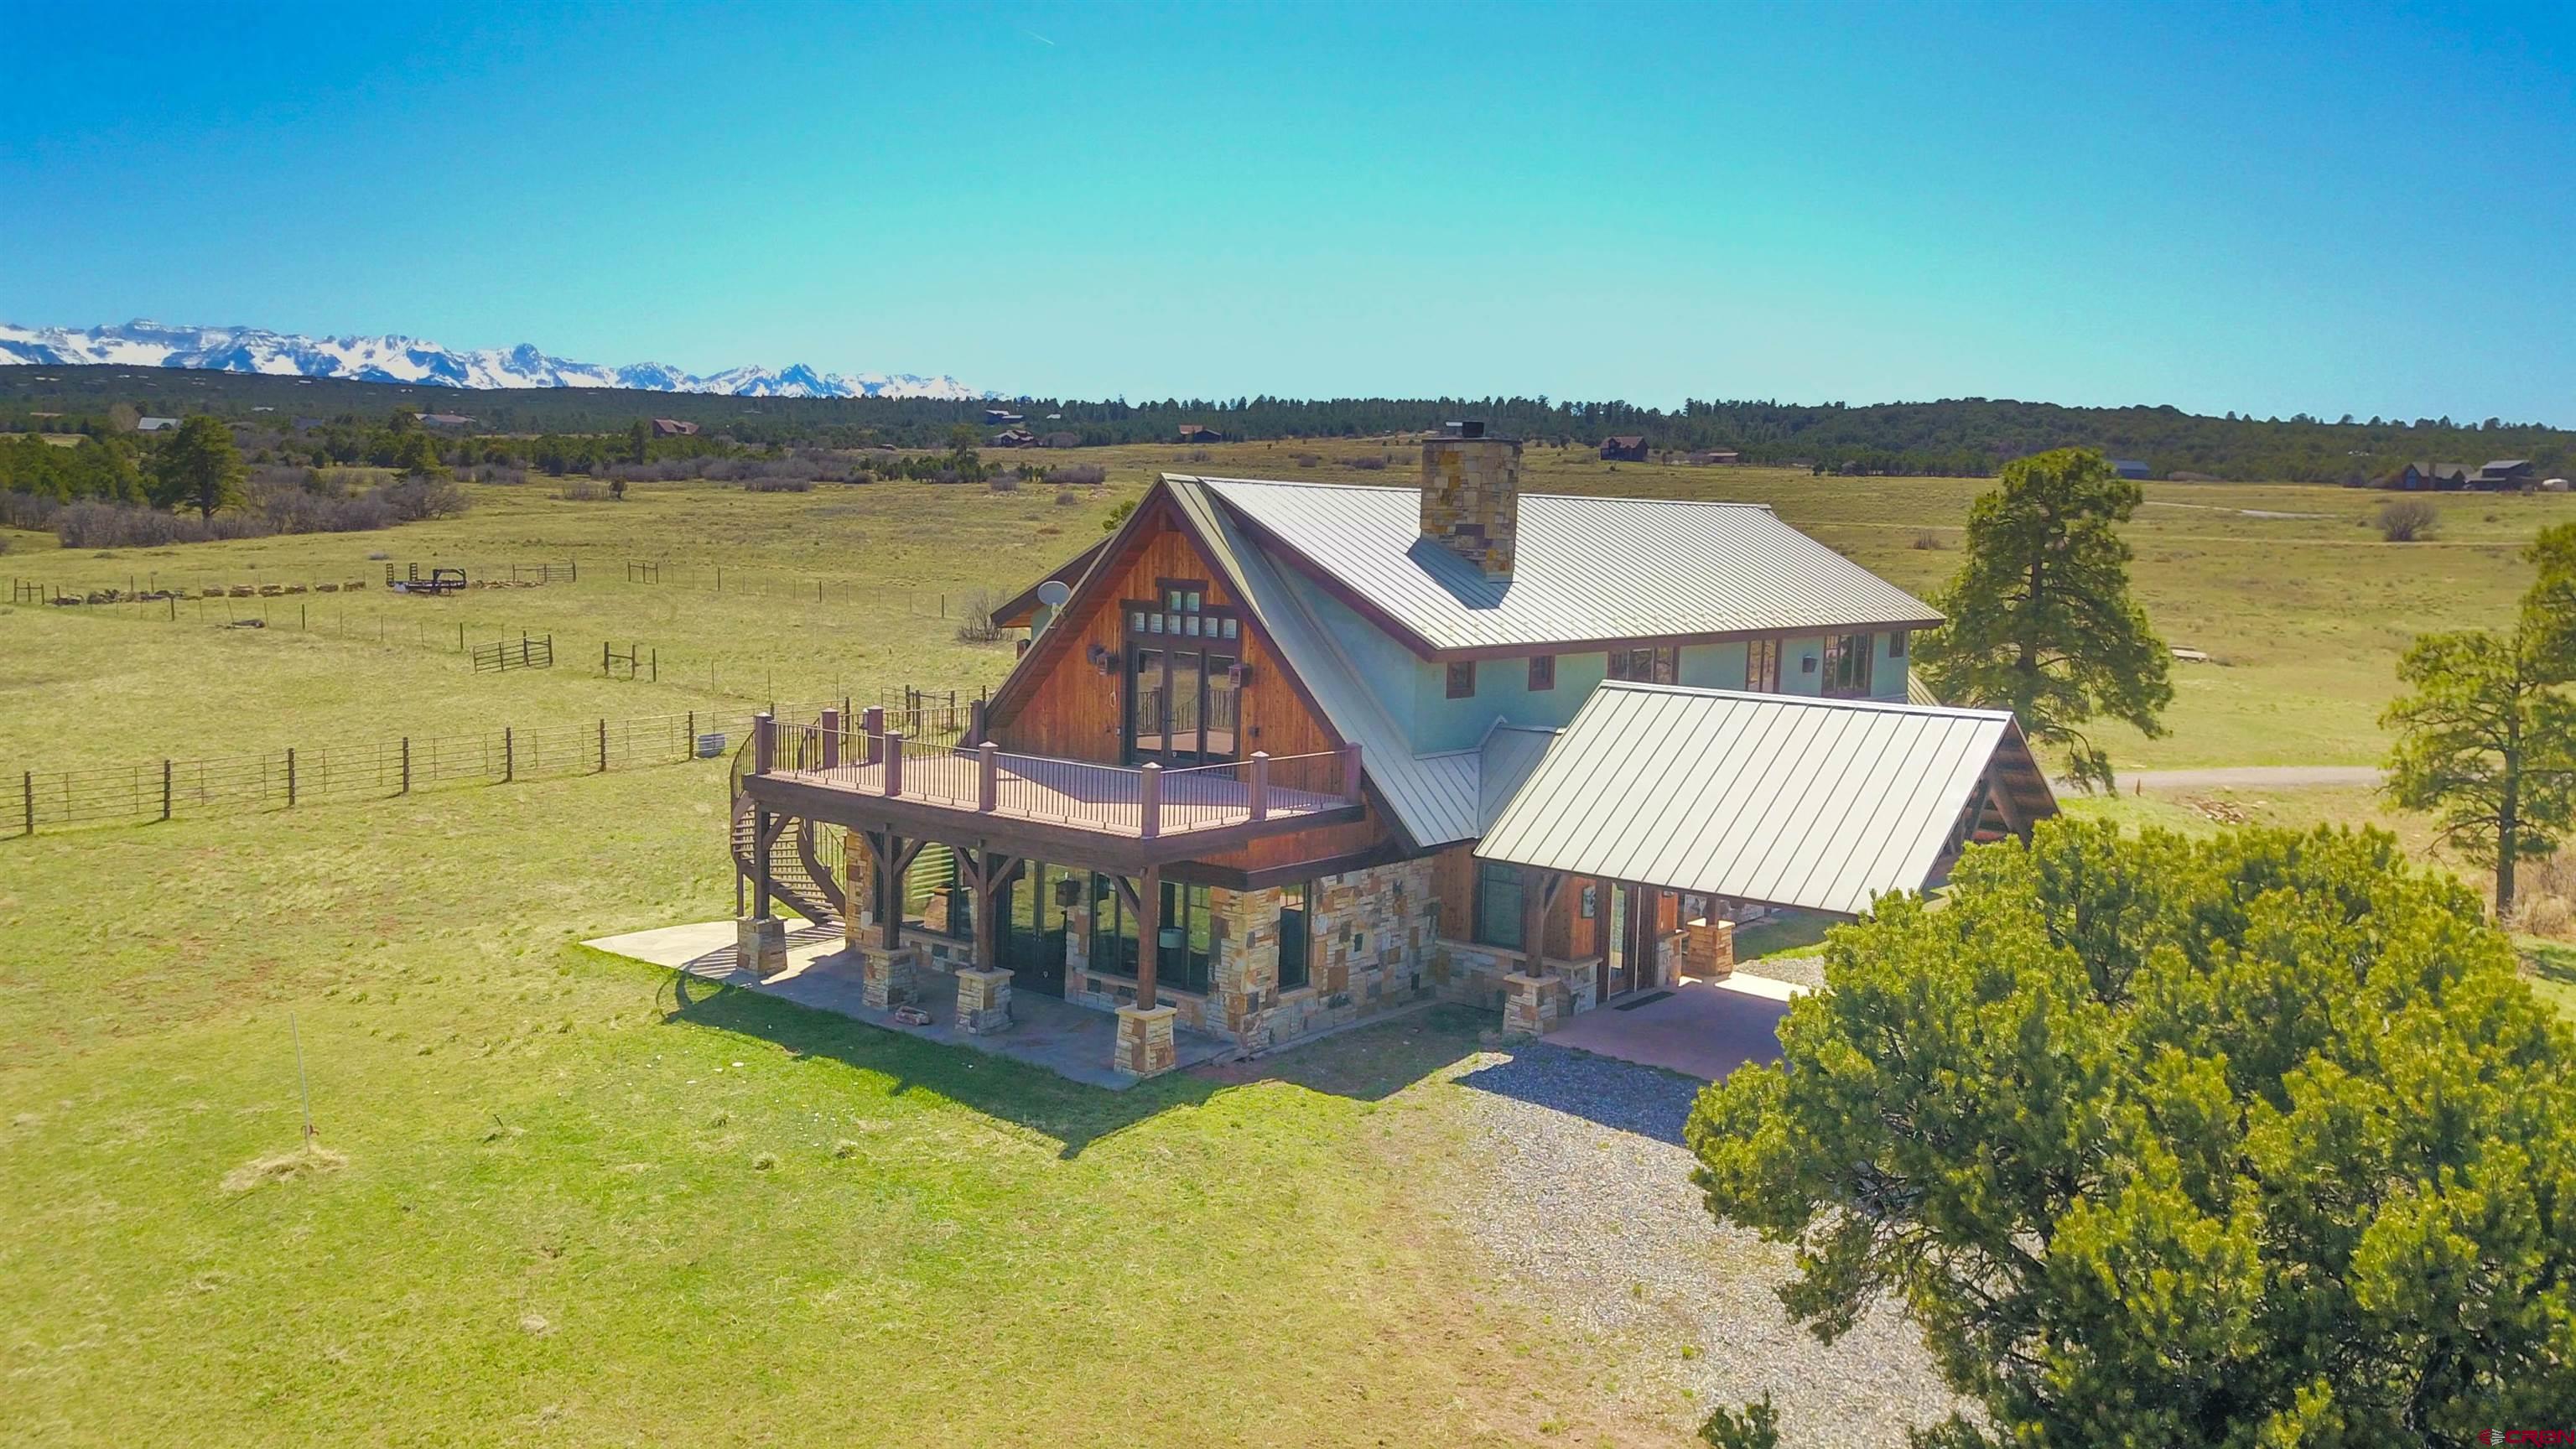 This custom home, offering vast 360 degree views of the Cimarron, Sneffels Ranges and valley floor. The house is set on the back corner of 40 acres, bordering a large private ranch as well as a greenbelt, giving owners and guests tasteful and private luxury. This property has 3,900 square feet of living space, a peaceful site for a retreat. Four elegant en-suite bedrooms are each equipped with soothing steam showers. Stay warm during Colorado winters with four grand fireplaces, one of which wood burning. Entertainment easily accomplished with the distinguished billiards room, equipped with an exclusive bar for cocktail connoisseurs. Sprawling decks allow owners the elevated advantage point of looking out at the San Juan mountains while staying in the comfort of their own homes. A kitchen with solid brass hardware that complements the home’s mountain style. Additional handicap tailored kitchen. A hydraulic elevator and a disabled bedroom and bath on level 1 make this home accessible for all. Plus a garage large enough to house four SUVs and all your toys. This custom-built home is sure to enthrall all. . As you enter through the Hand-Sculptured Glass Aspen Treed Door to the custom locally sourced hand-forged light fixtures this home has had every item considered and executed to a masterpiece. With its vast views of the San Juans, Cimarrons, Valley Floor, and massive decks when you see the Timber-Framed Porte-Cochere it will guarantee a Grand Entry. End of the road privacy here in Ridgway Colorado.